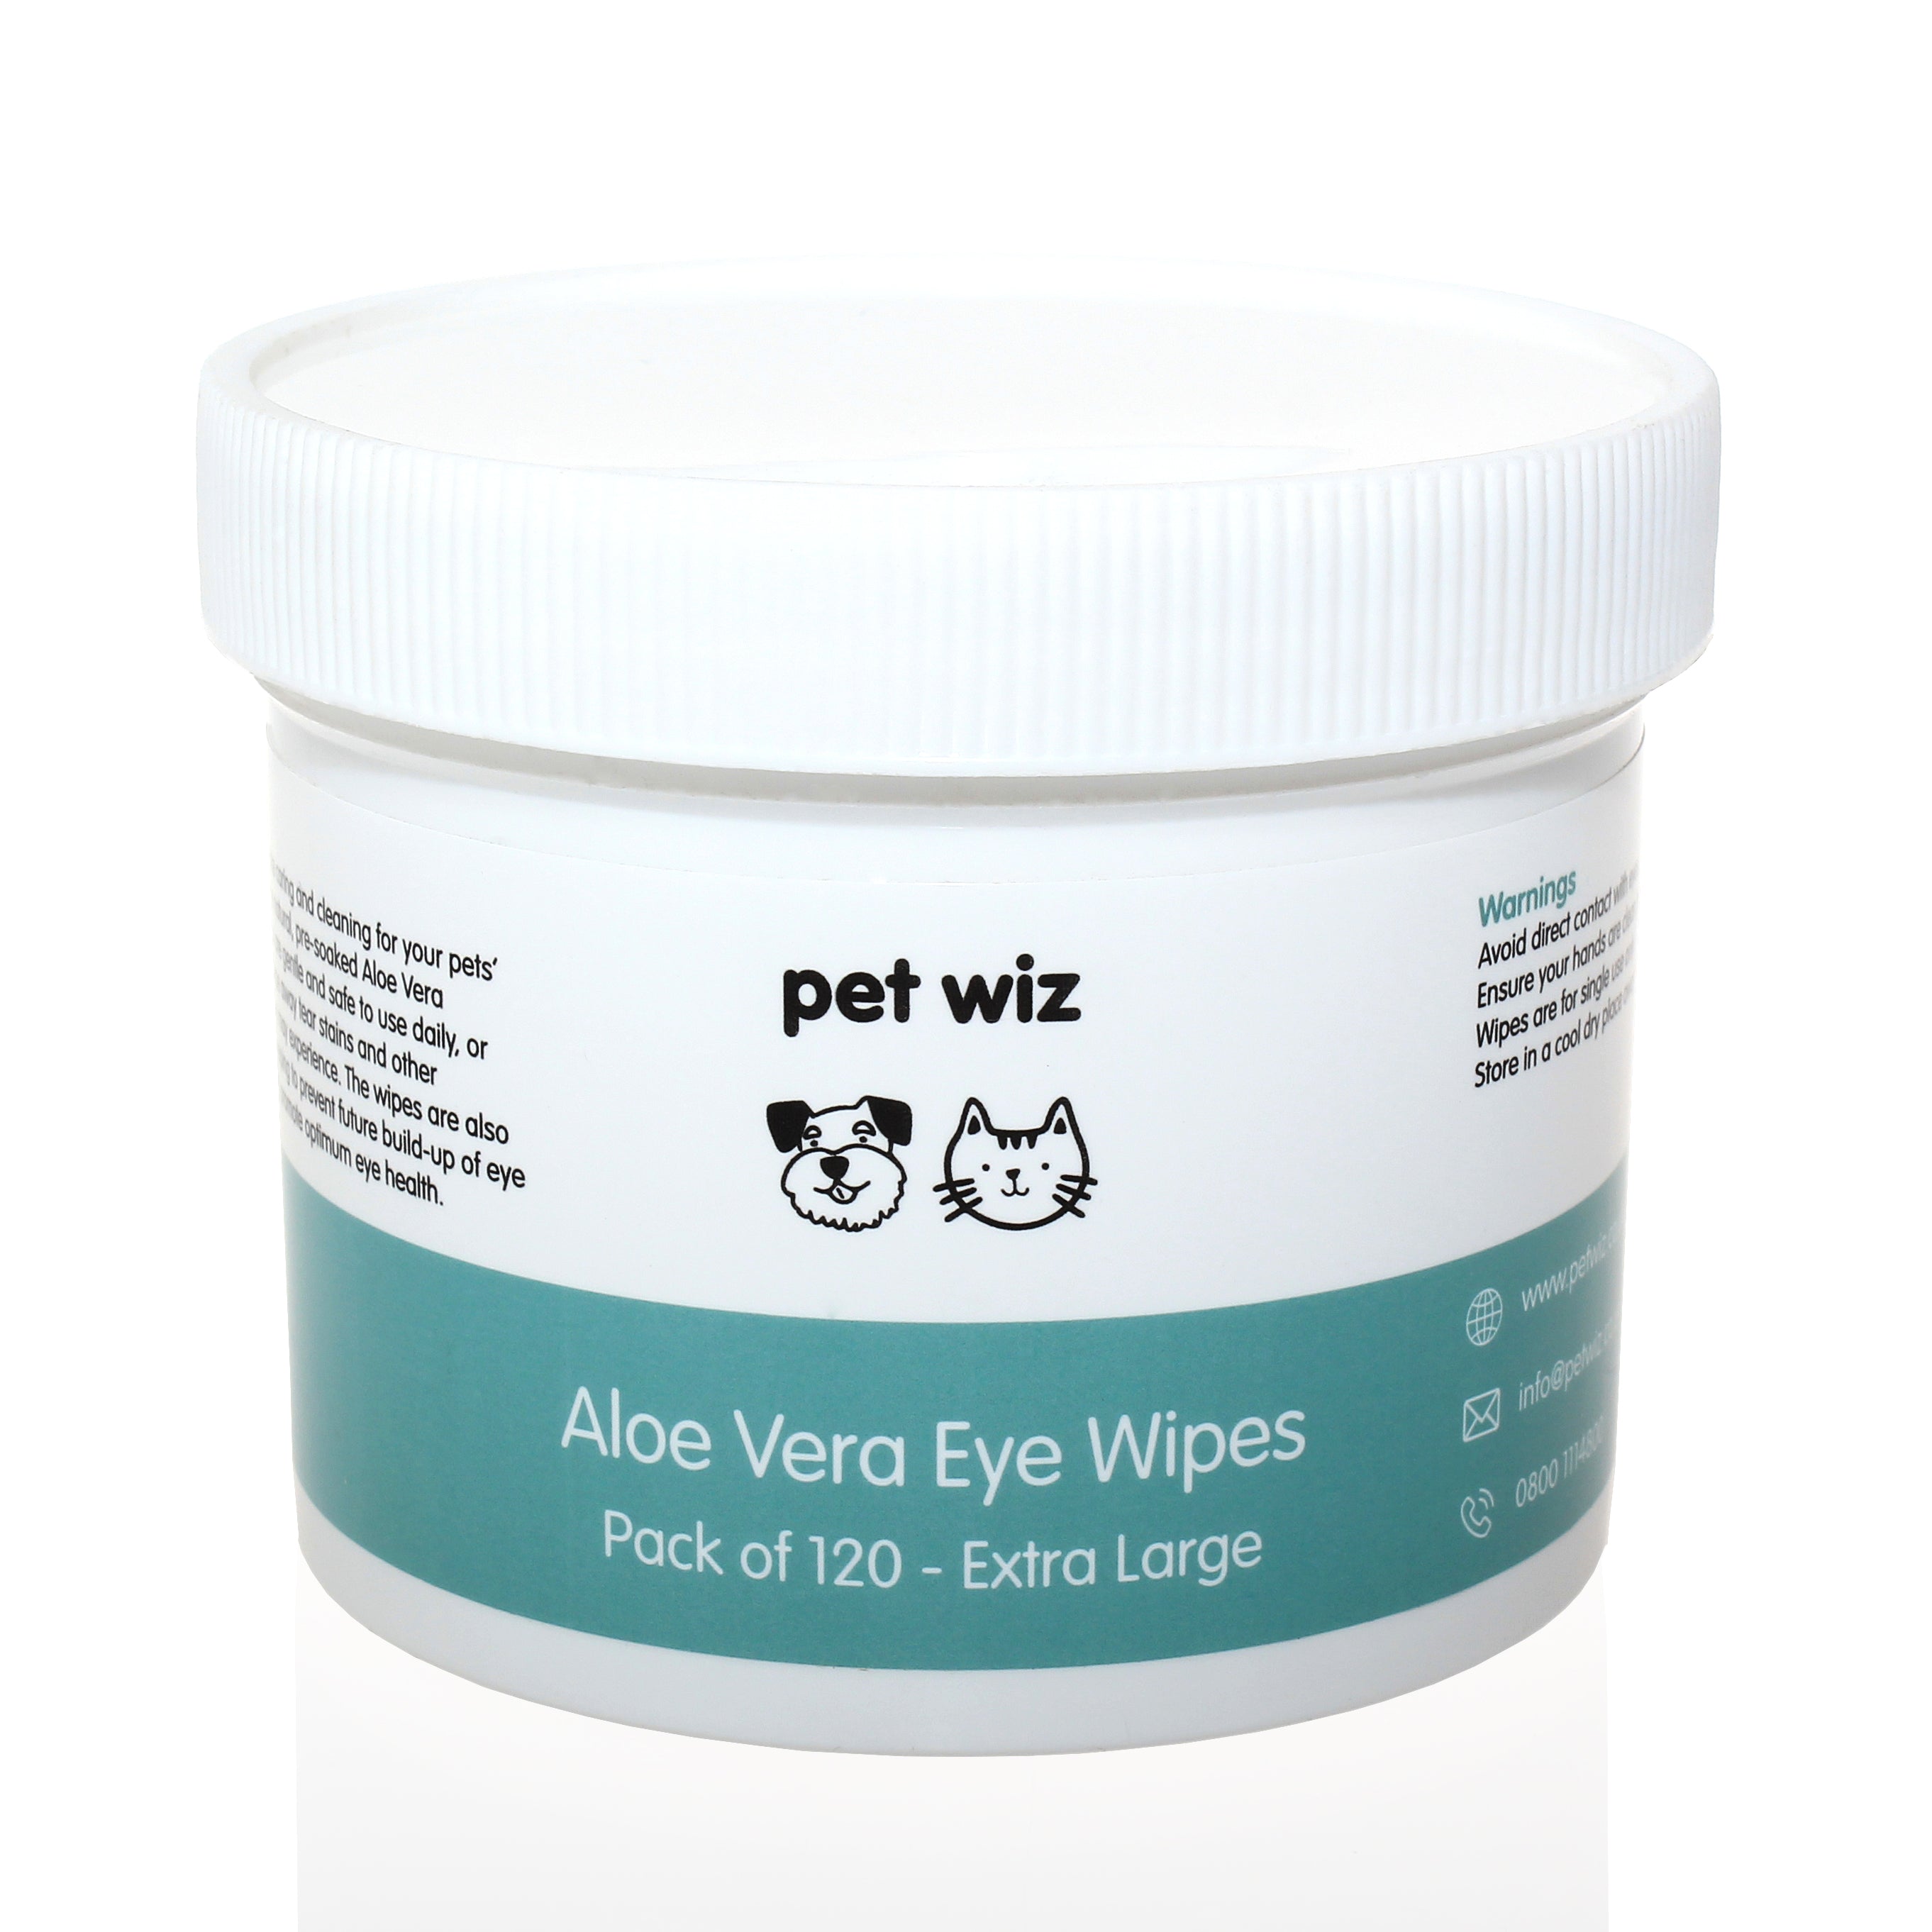 Pets Empire Pet Wipes Dog Cleaning Wipes Natural Aloe Effective